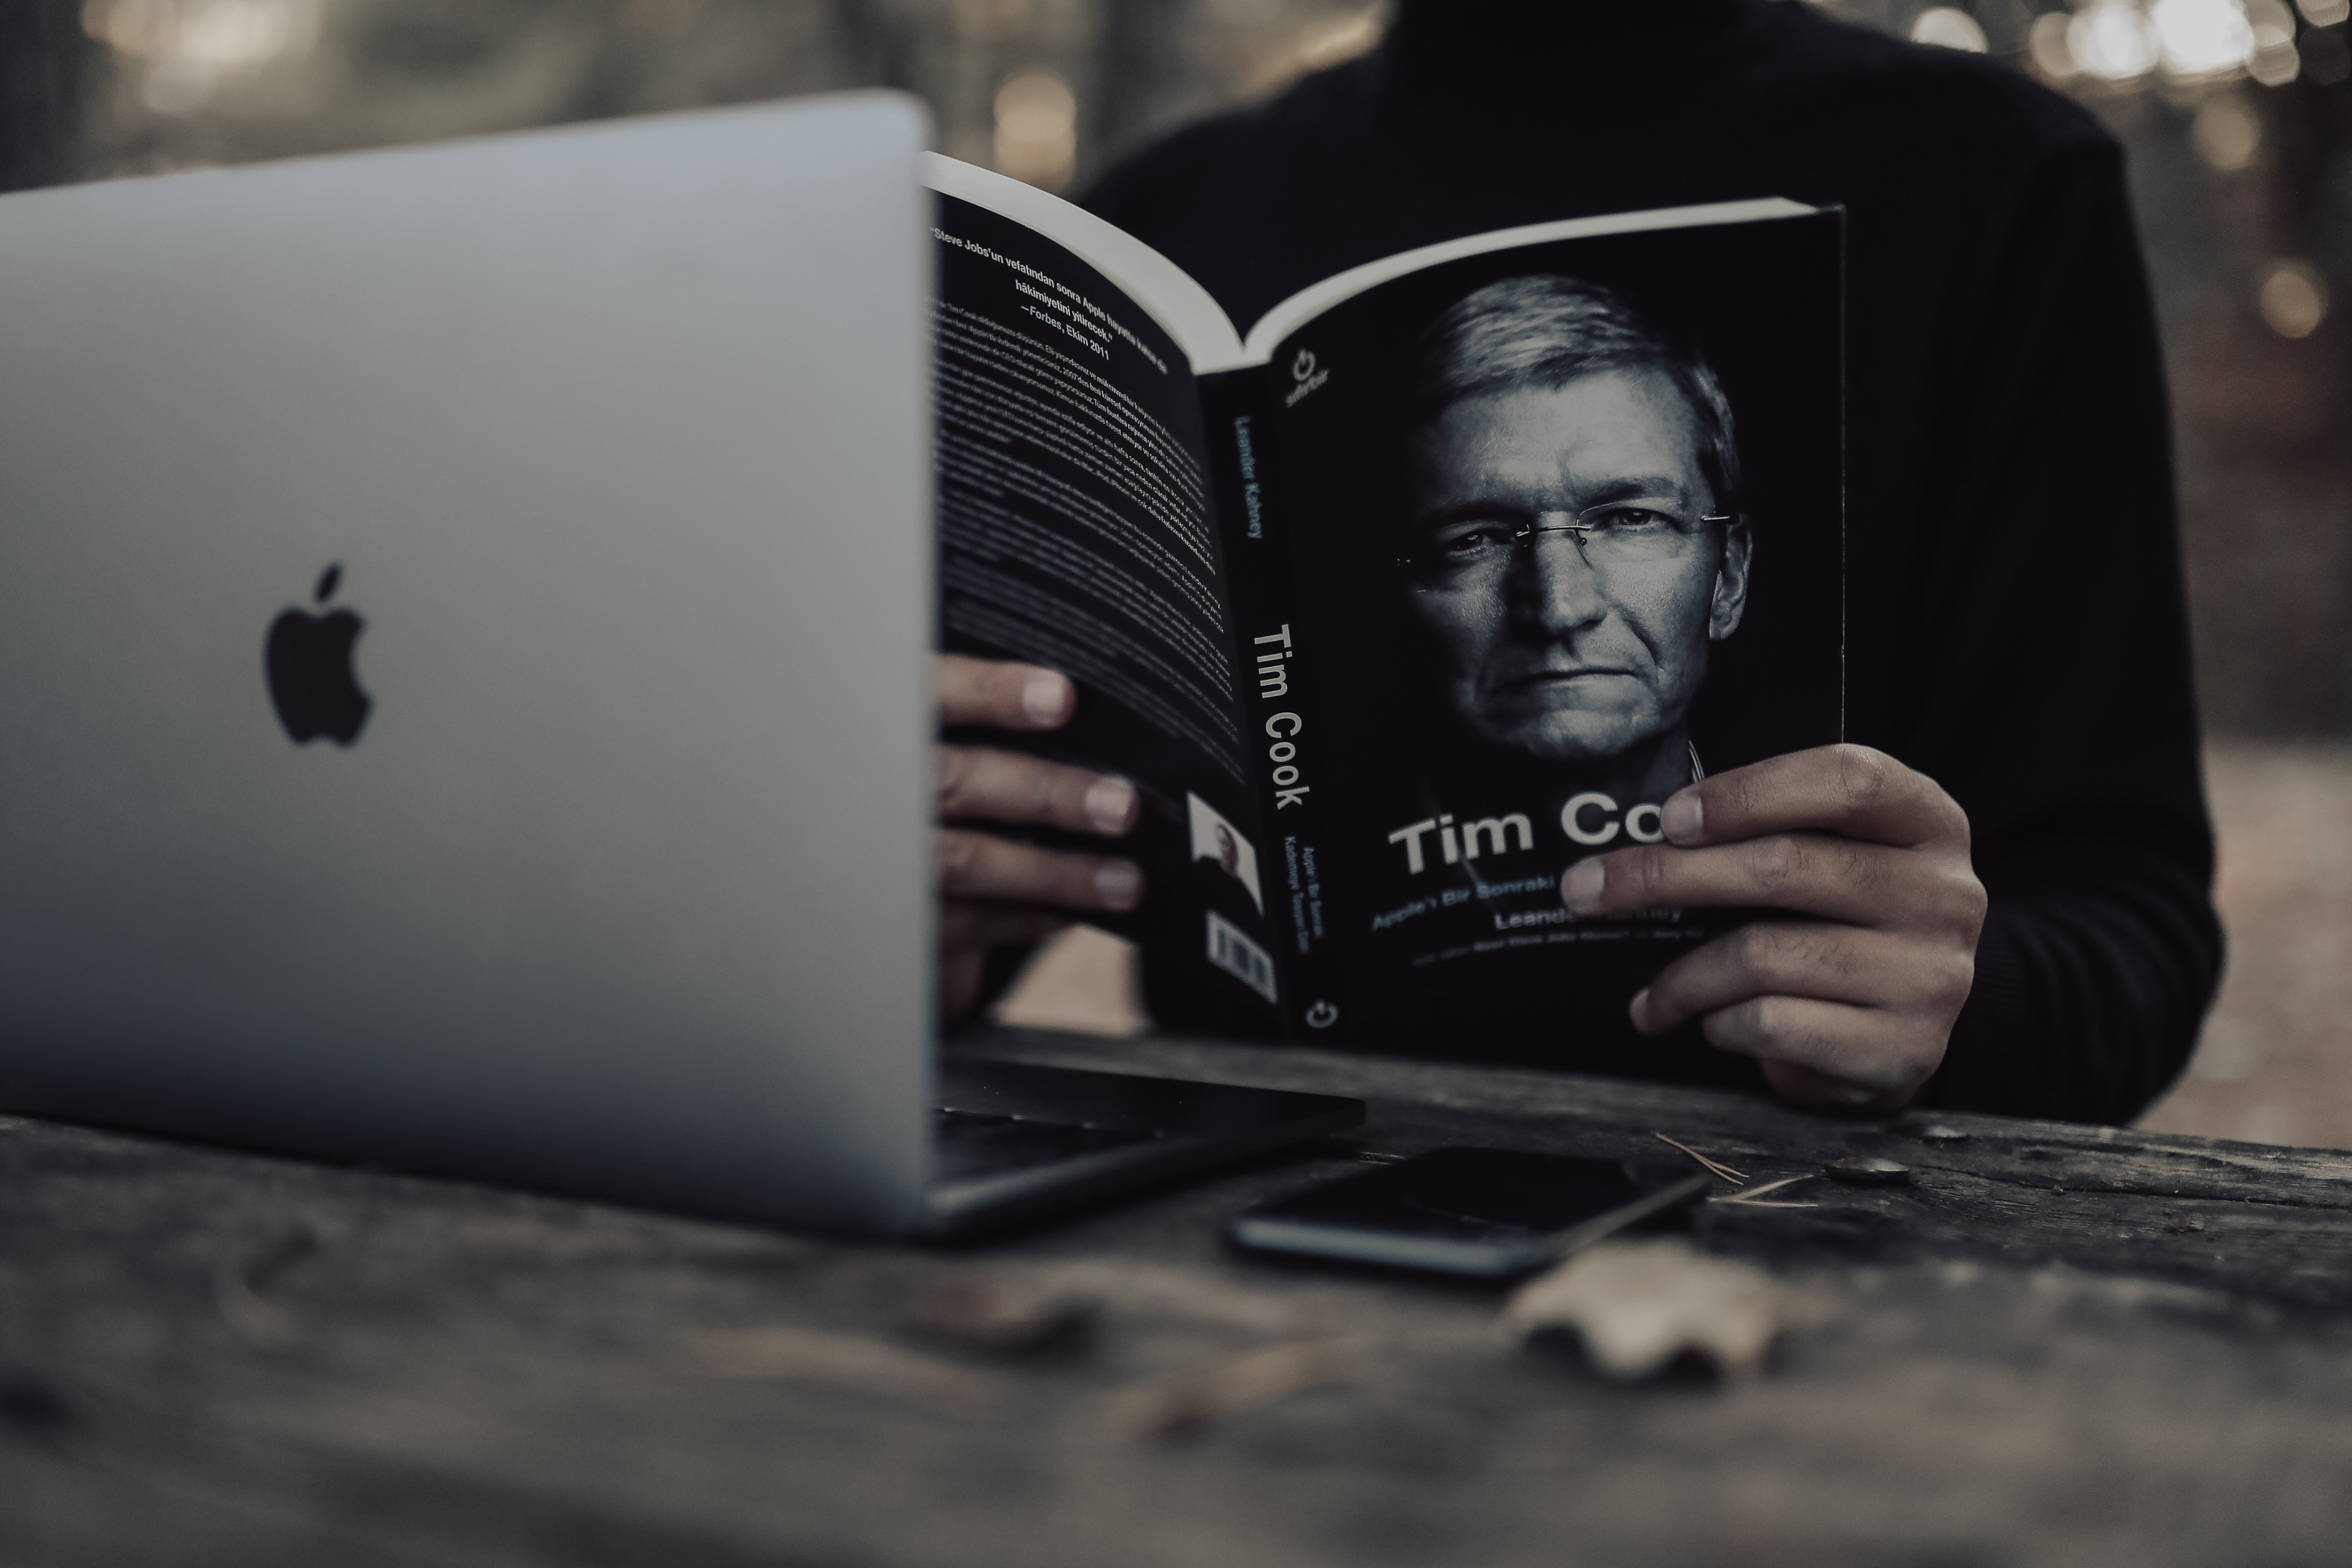 A person reading Apple CEO Tim Cook's biography